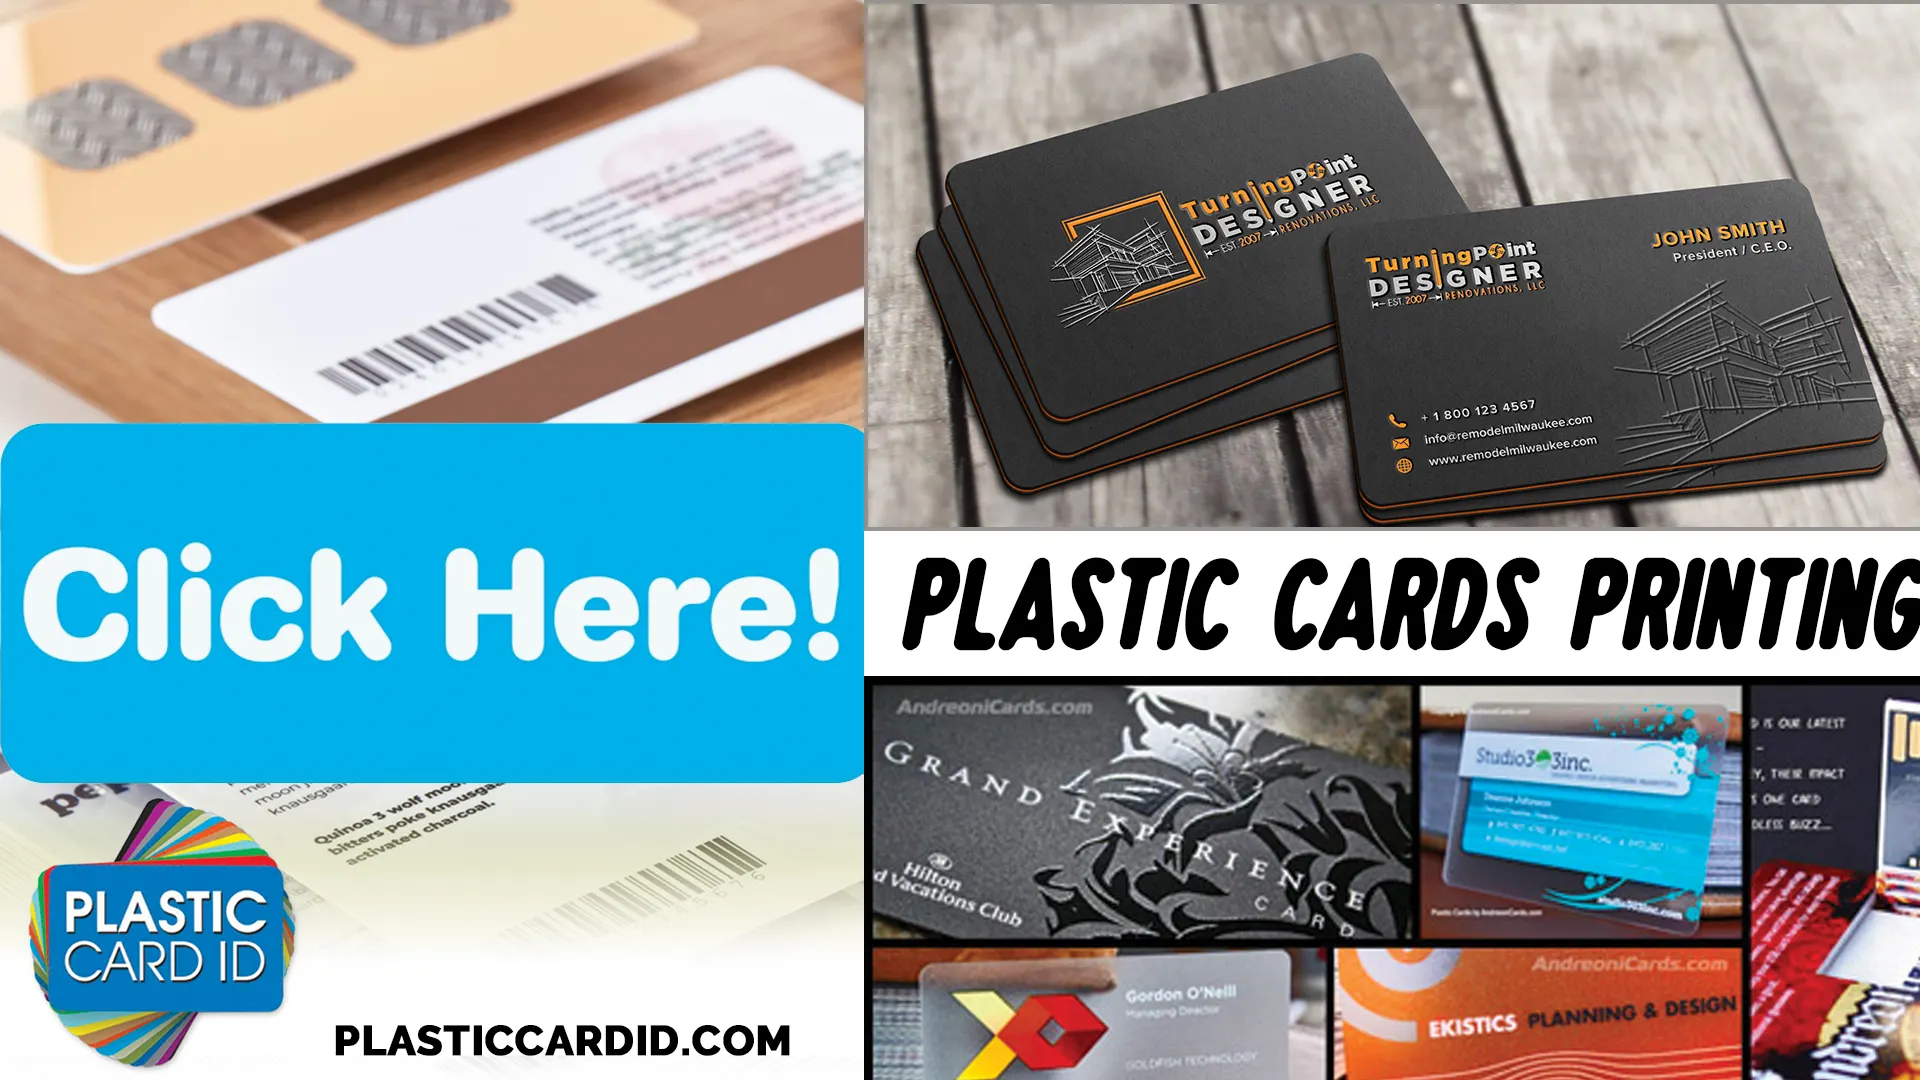 The Power Behind Your Plastic: Card Printers and Refill Supplies